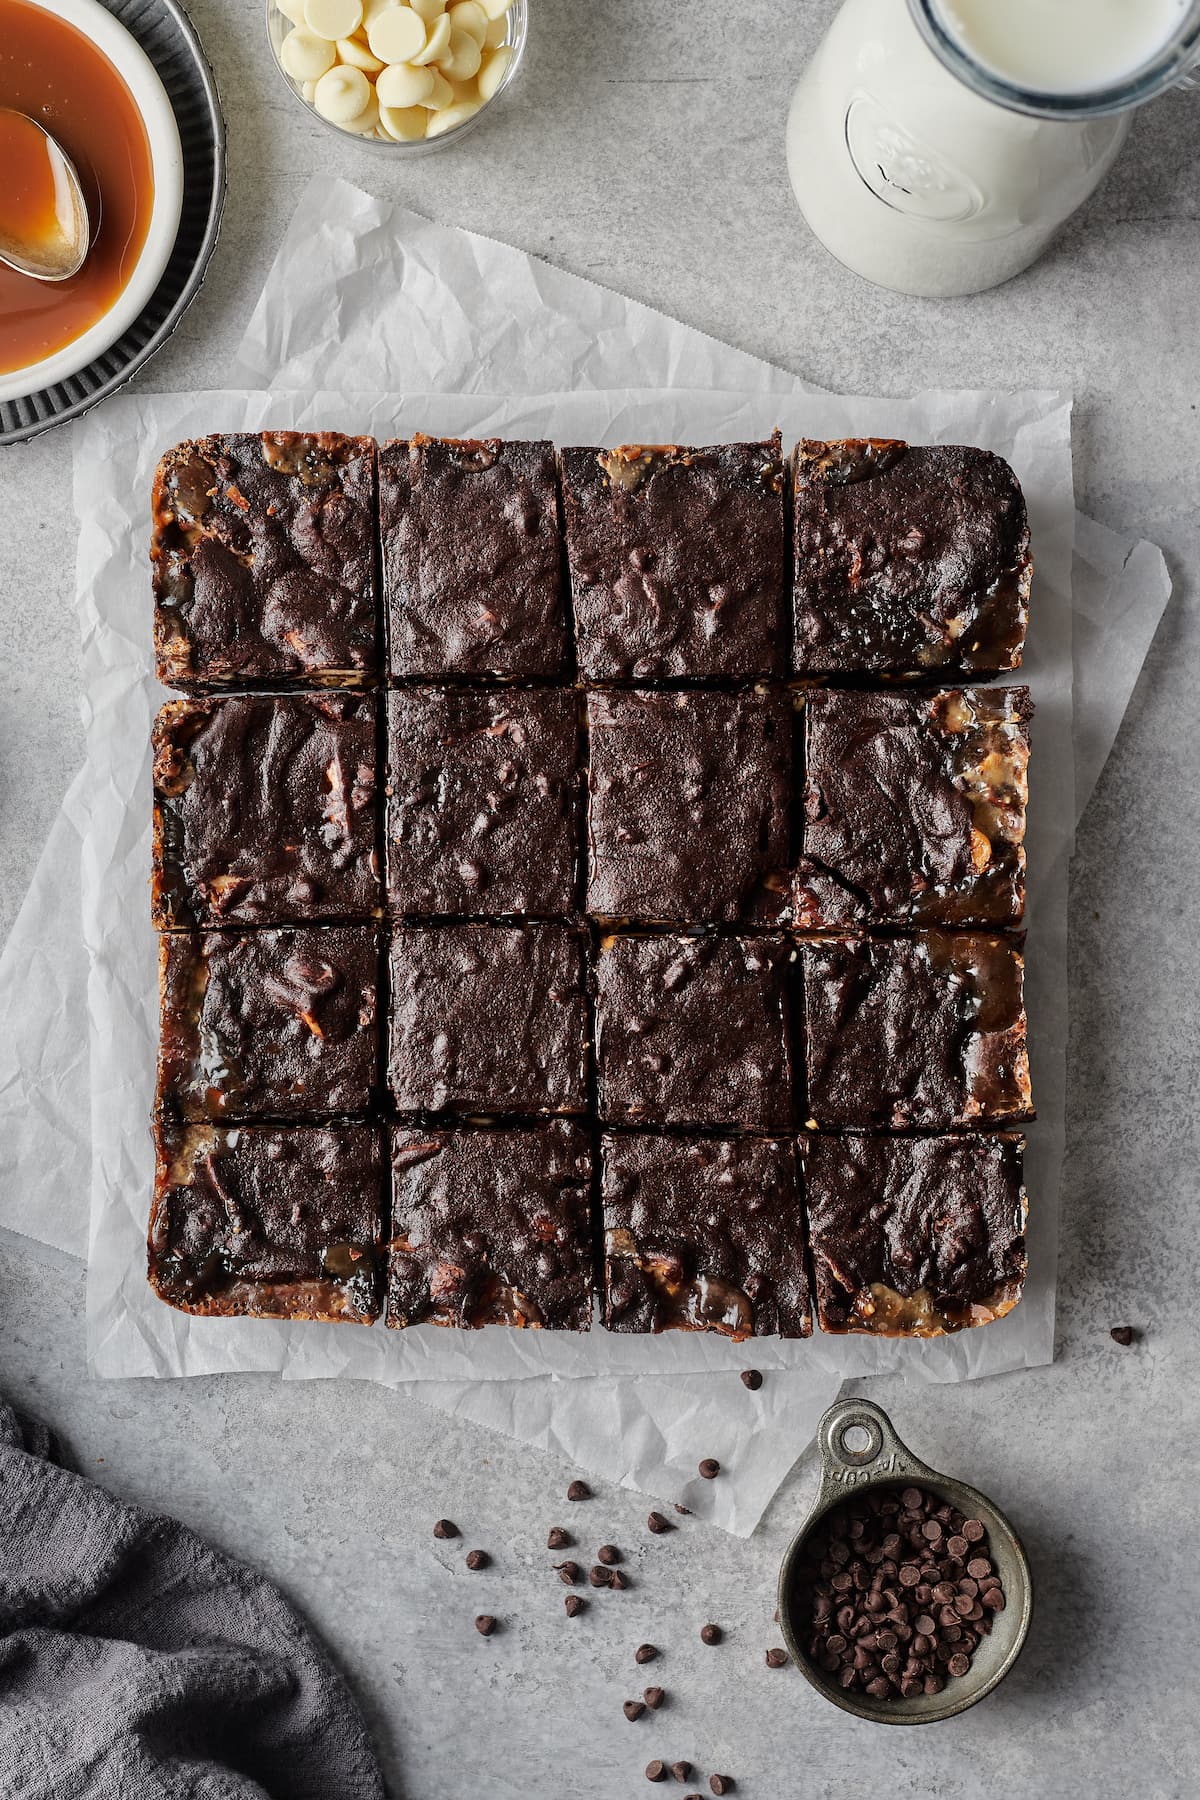 Baked brownies on parchment paper, sliced into squares.